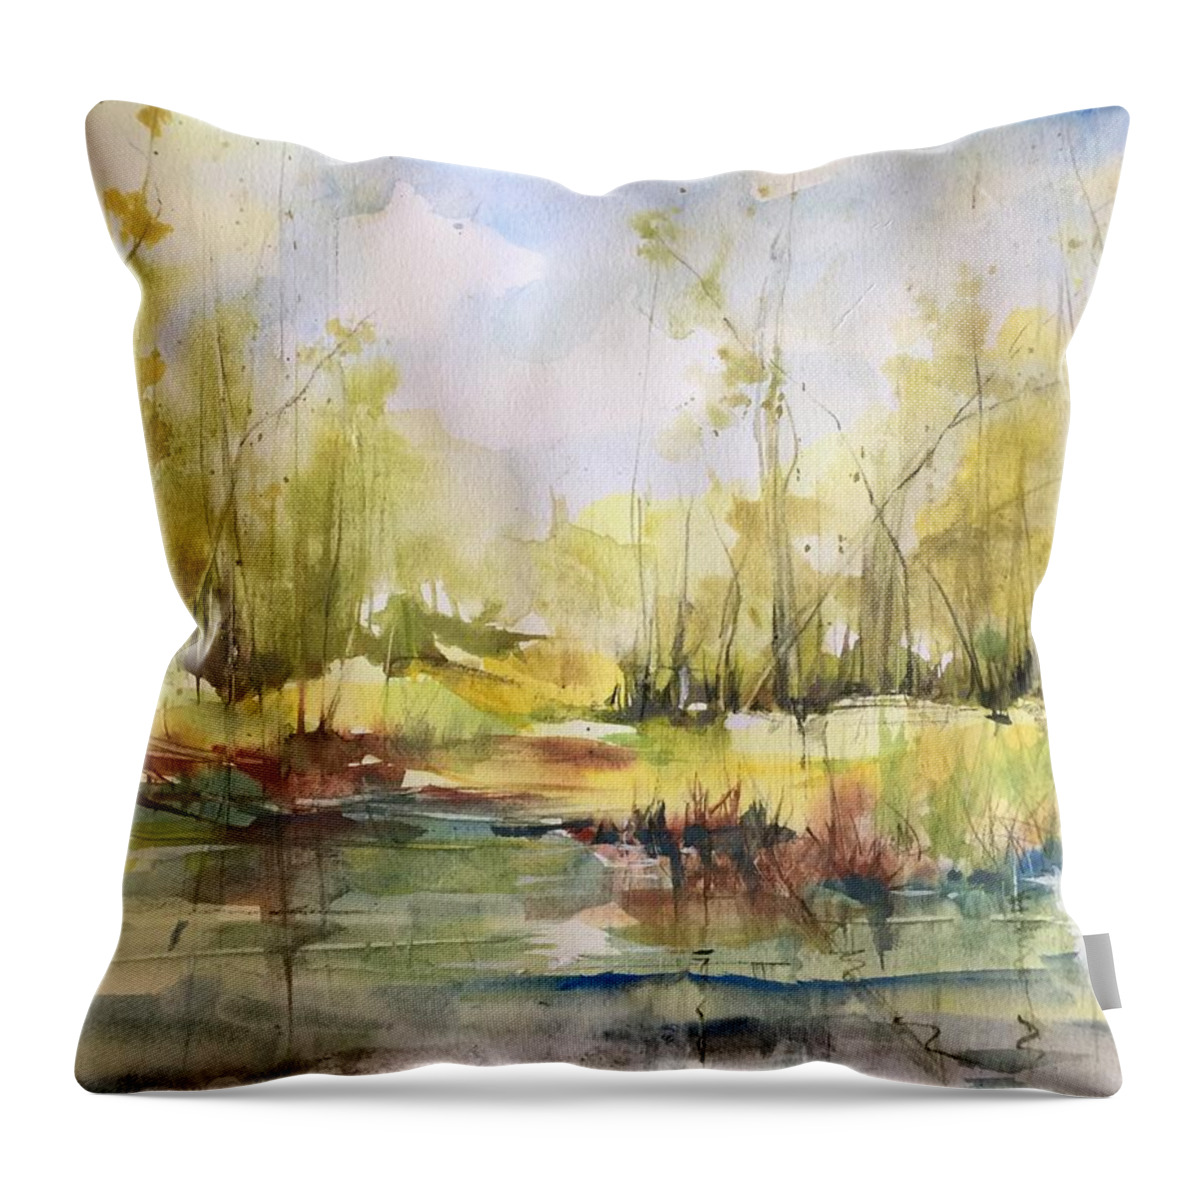 Tchefuncte River Throw Pillow featuring the painting Tchefuncte River Series by Robin Miller-Bookhout